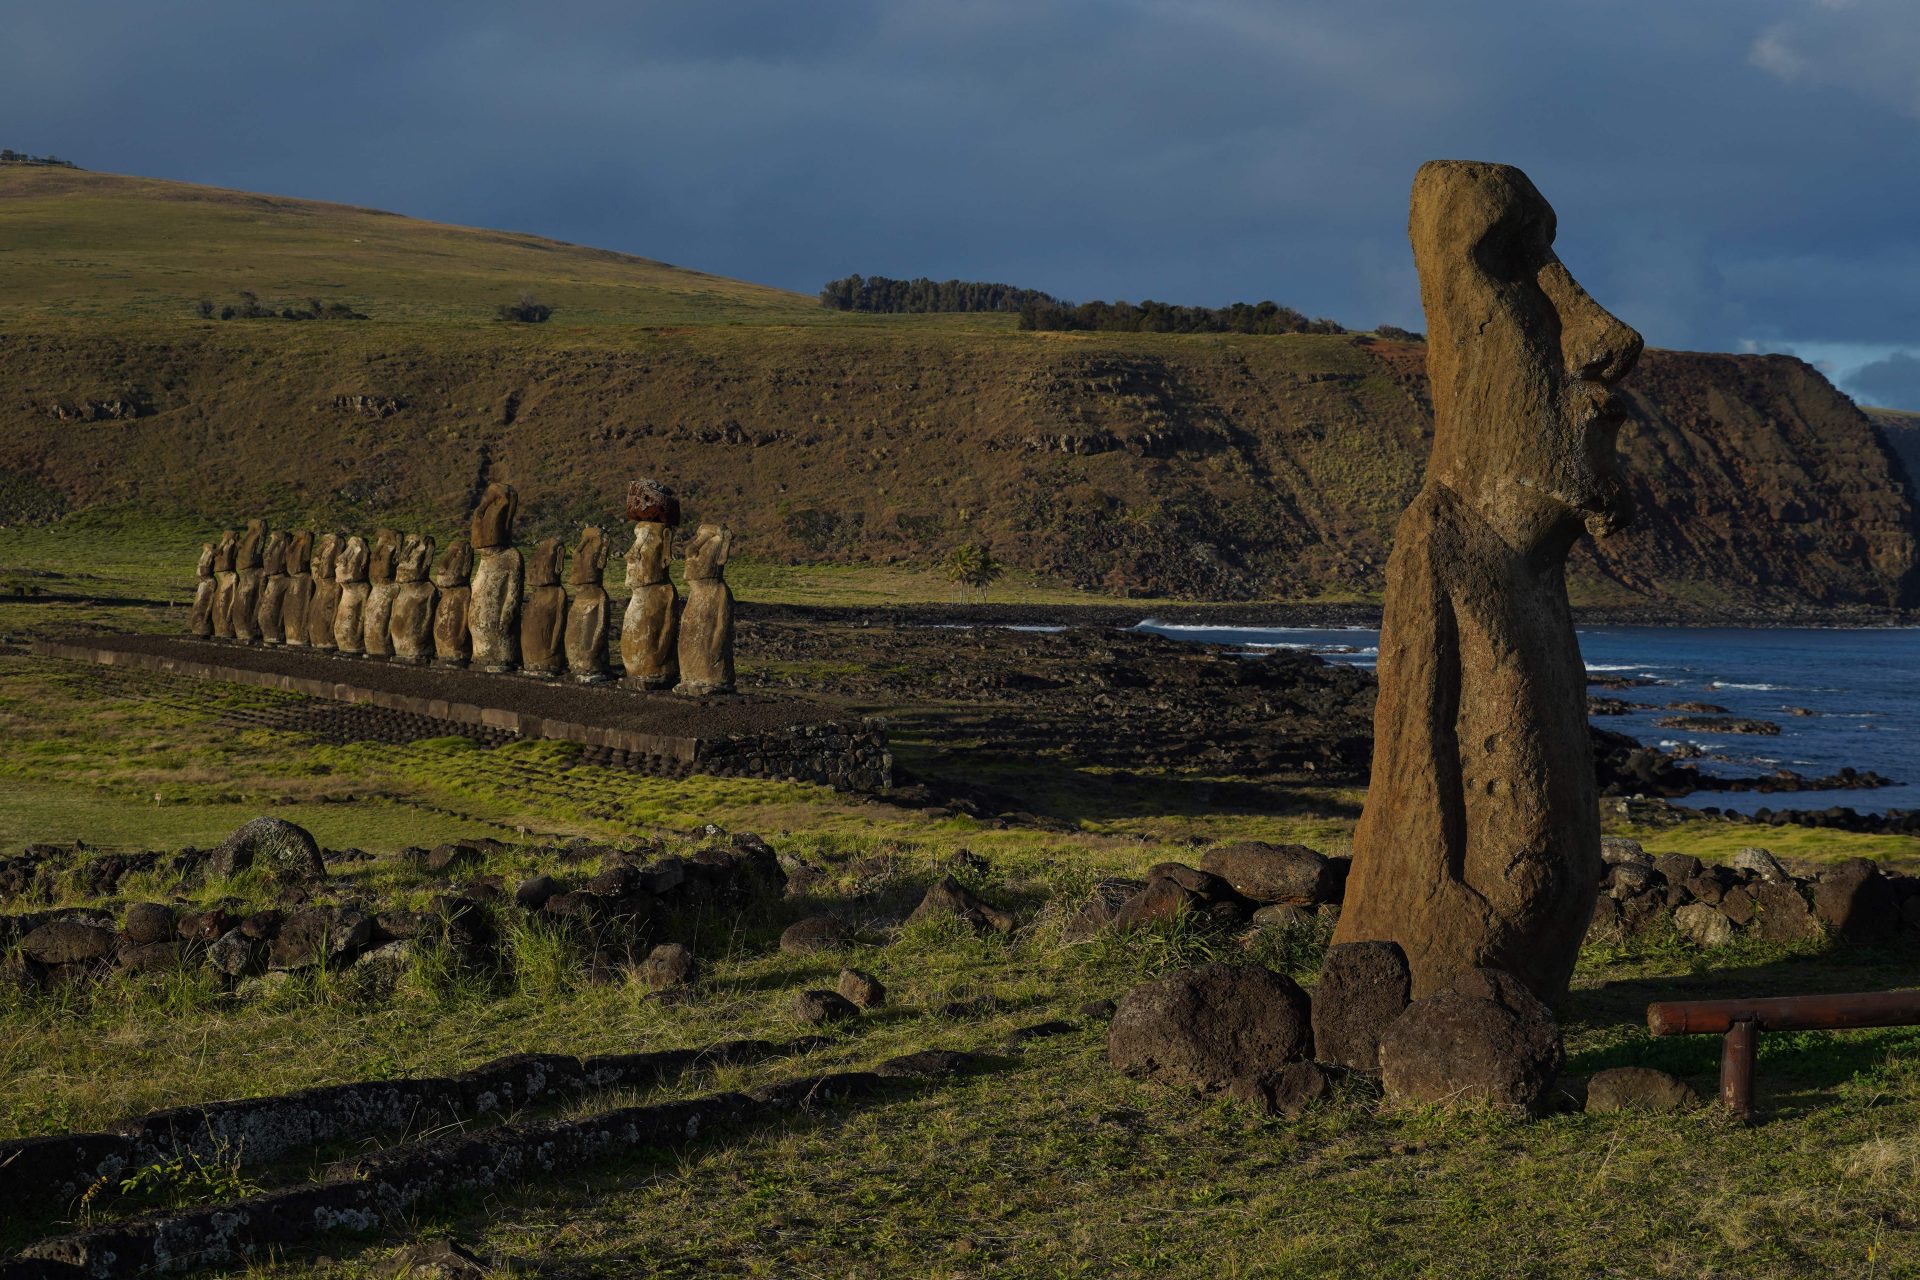 <p>Many archaeologists believe that the statues were symbols of authority and power, both religious and political, as well as a representation of the ancient Polynesians' ancestors. This is why the moai statues face away from the ocean and towards the villages, as if to watch over the people.</p>